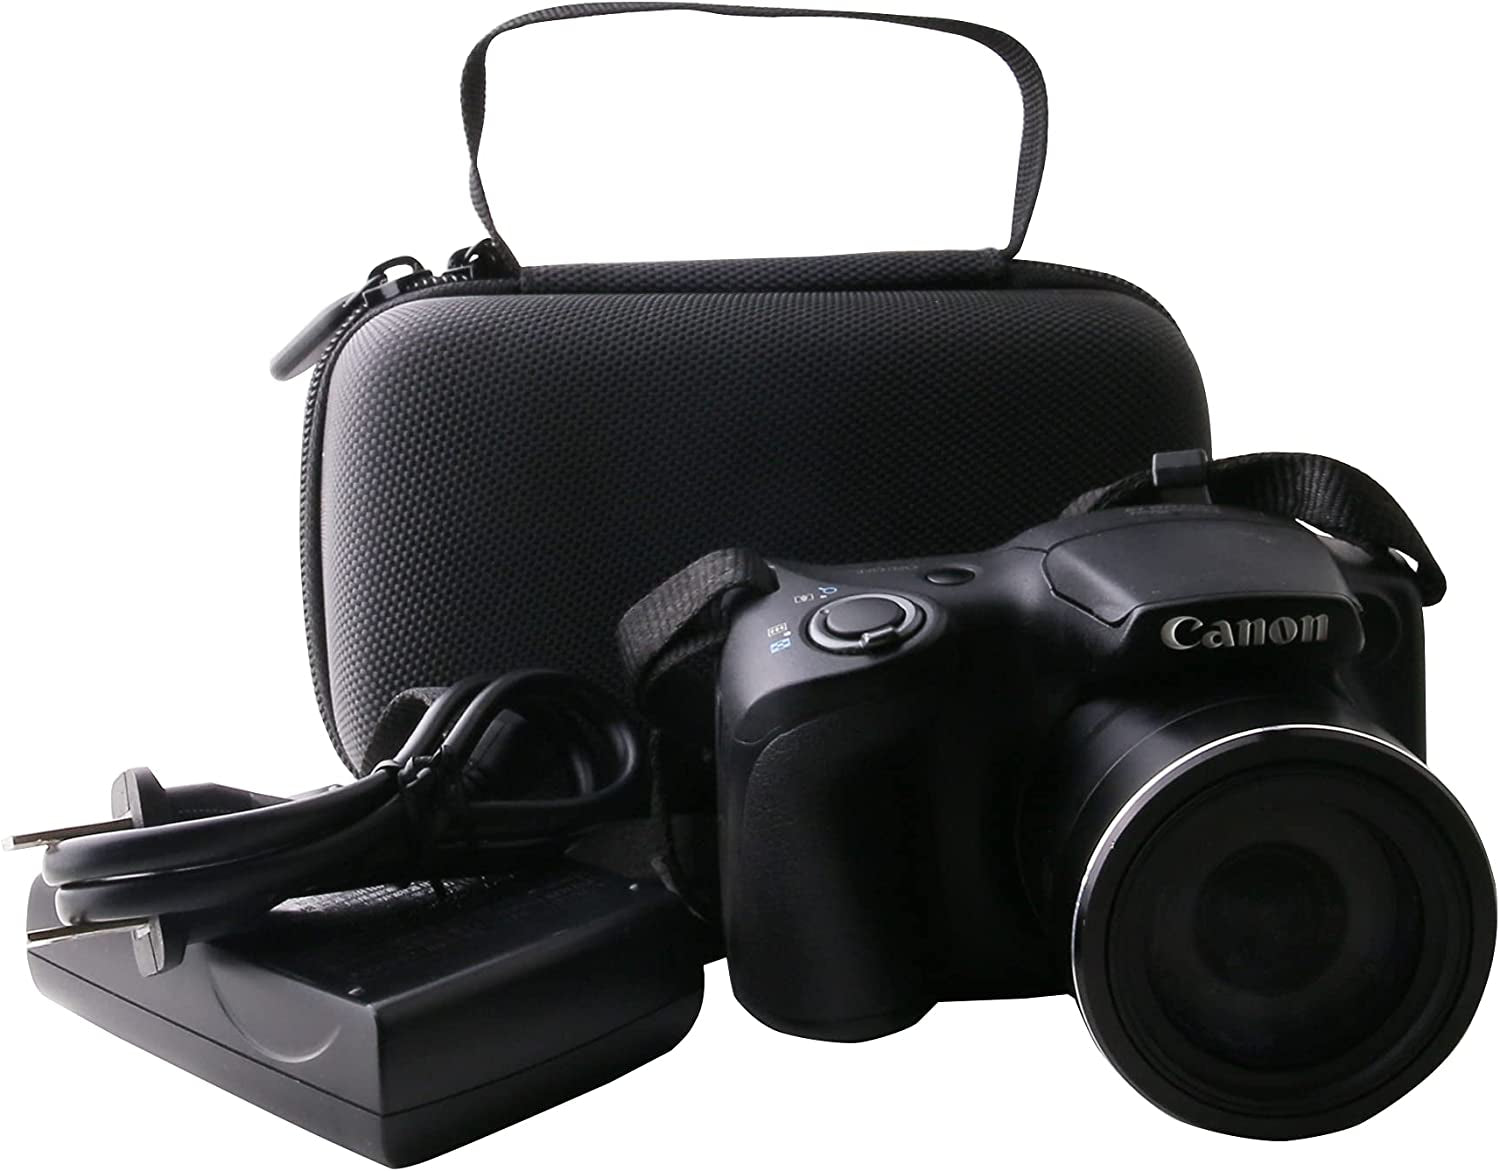 Hard Carrying Case for Canon Powershot SX420/SX410 Digital Camera